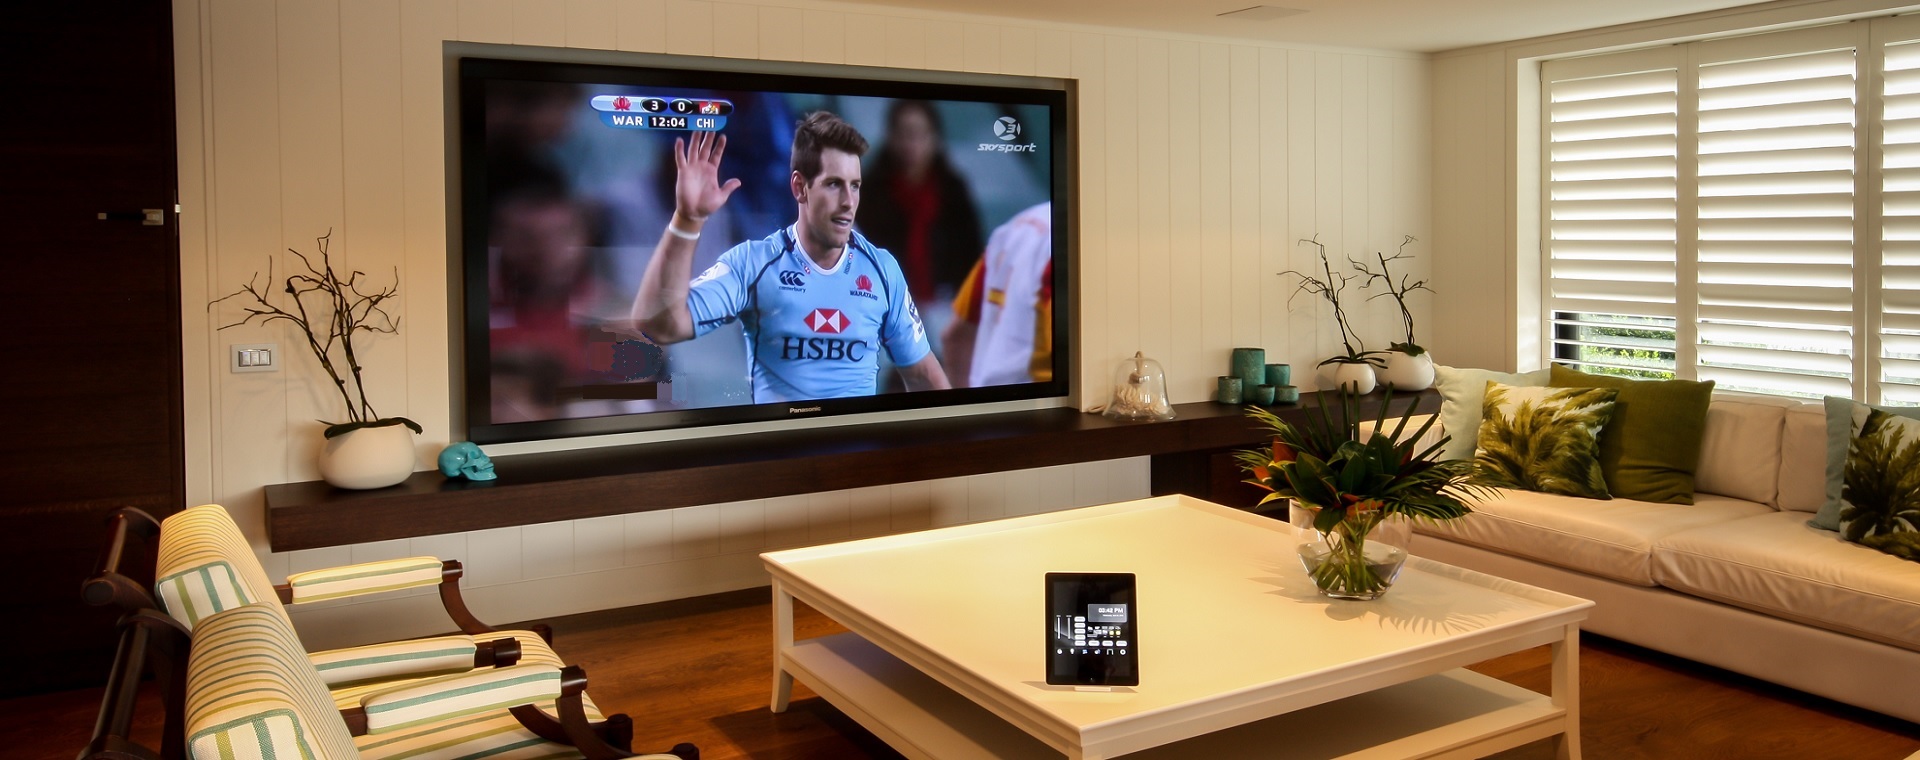 Modern lounge with a large TV screen showing a rugby league game.